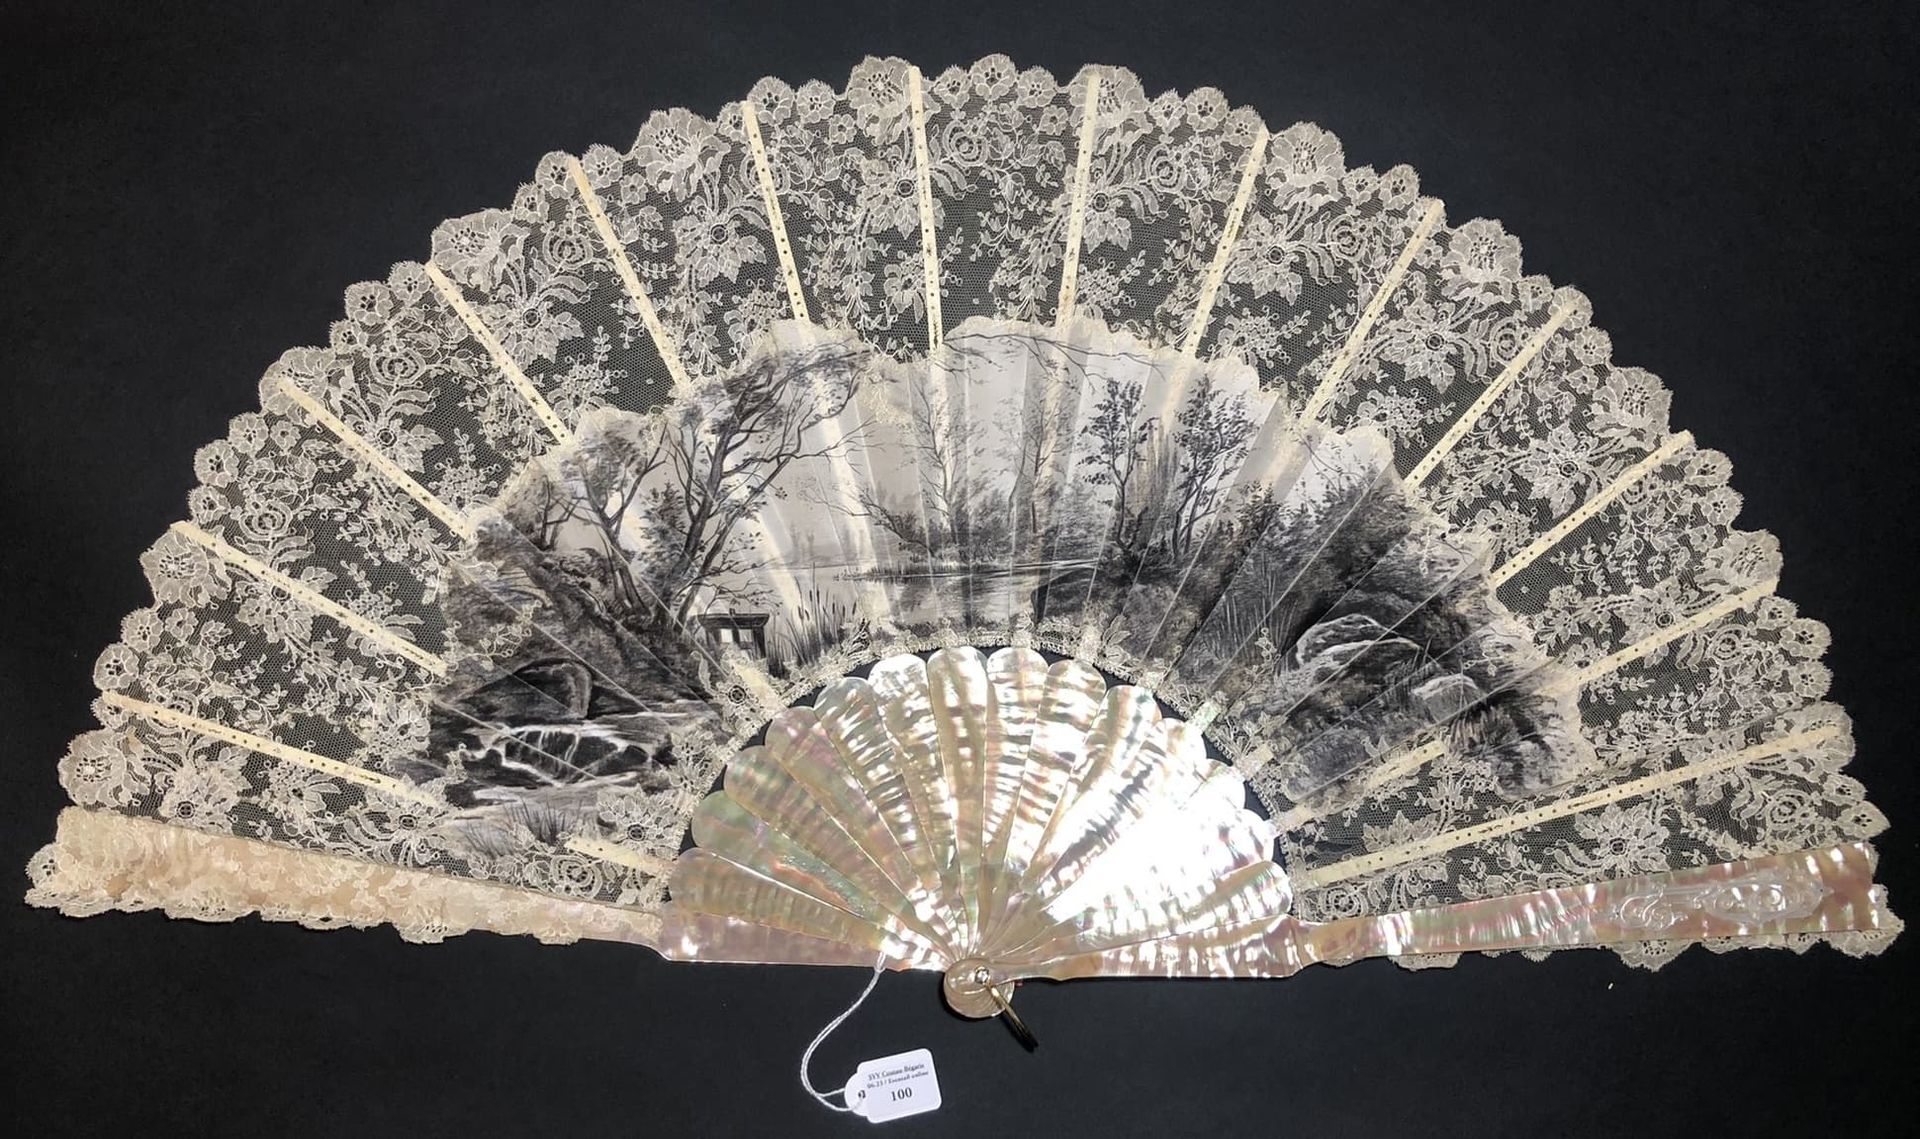 Null Landscape, Europe, circa 1890
Folded fan, the mechanical lace leaf decorate&hellip;